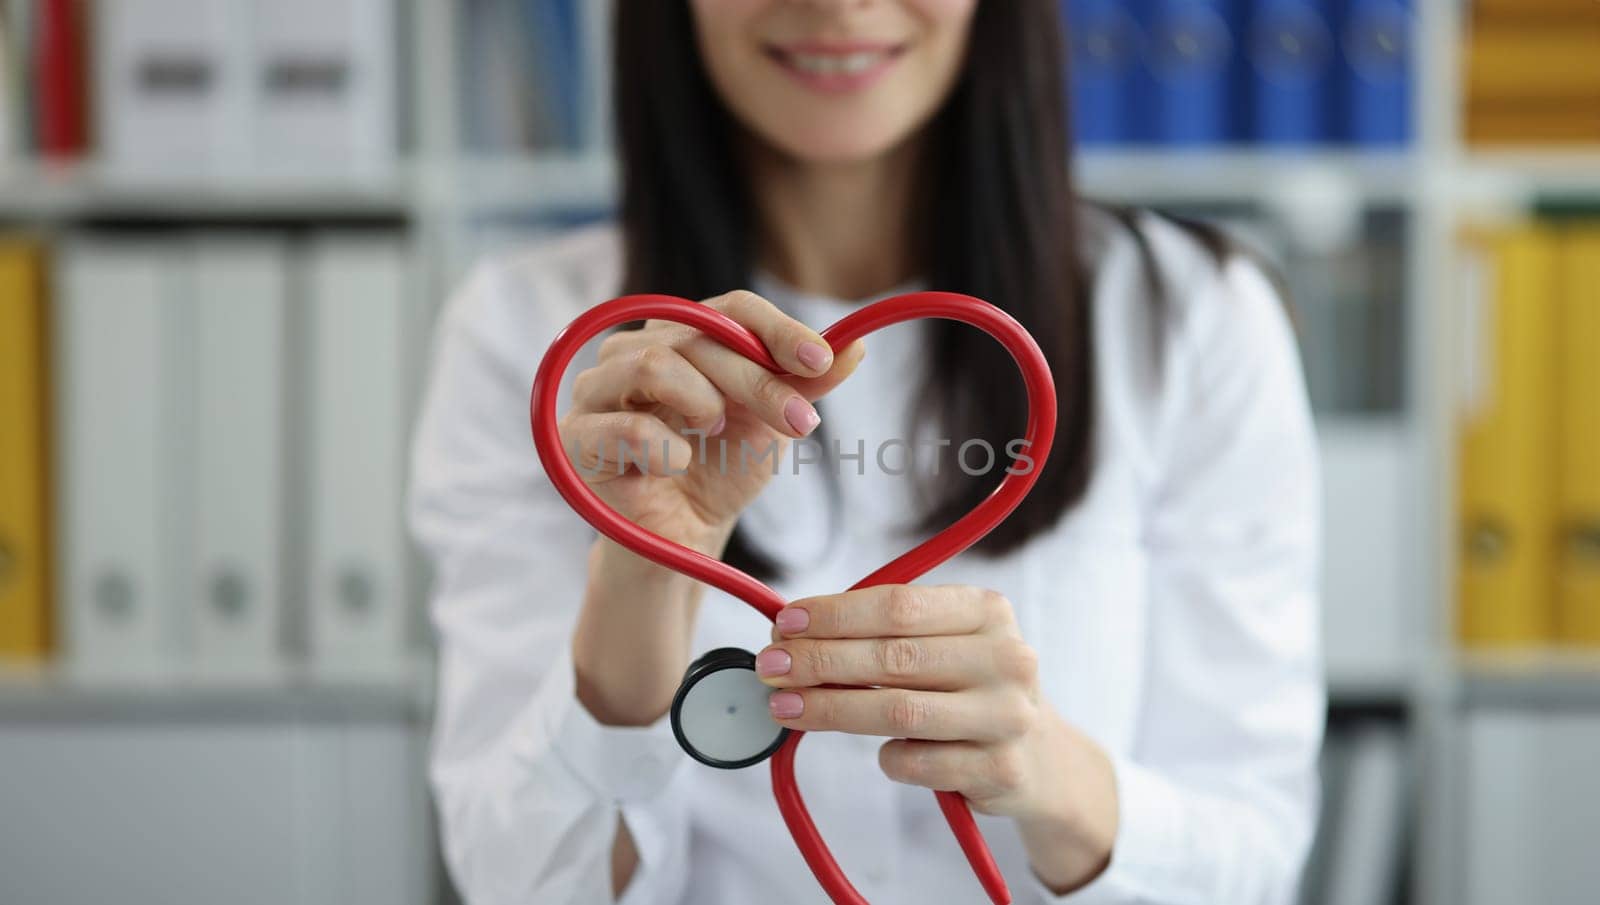 Medical worker make heart of stethoscope pipe, save life through donation or charity by kuprevich